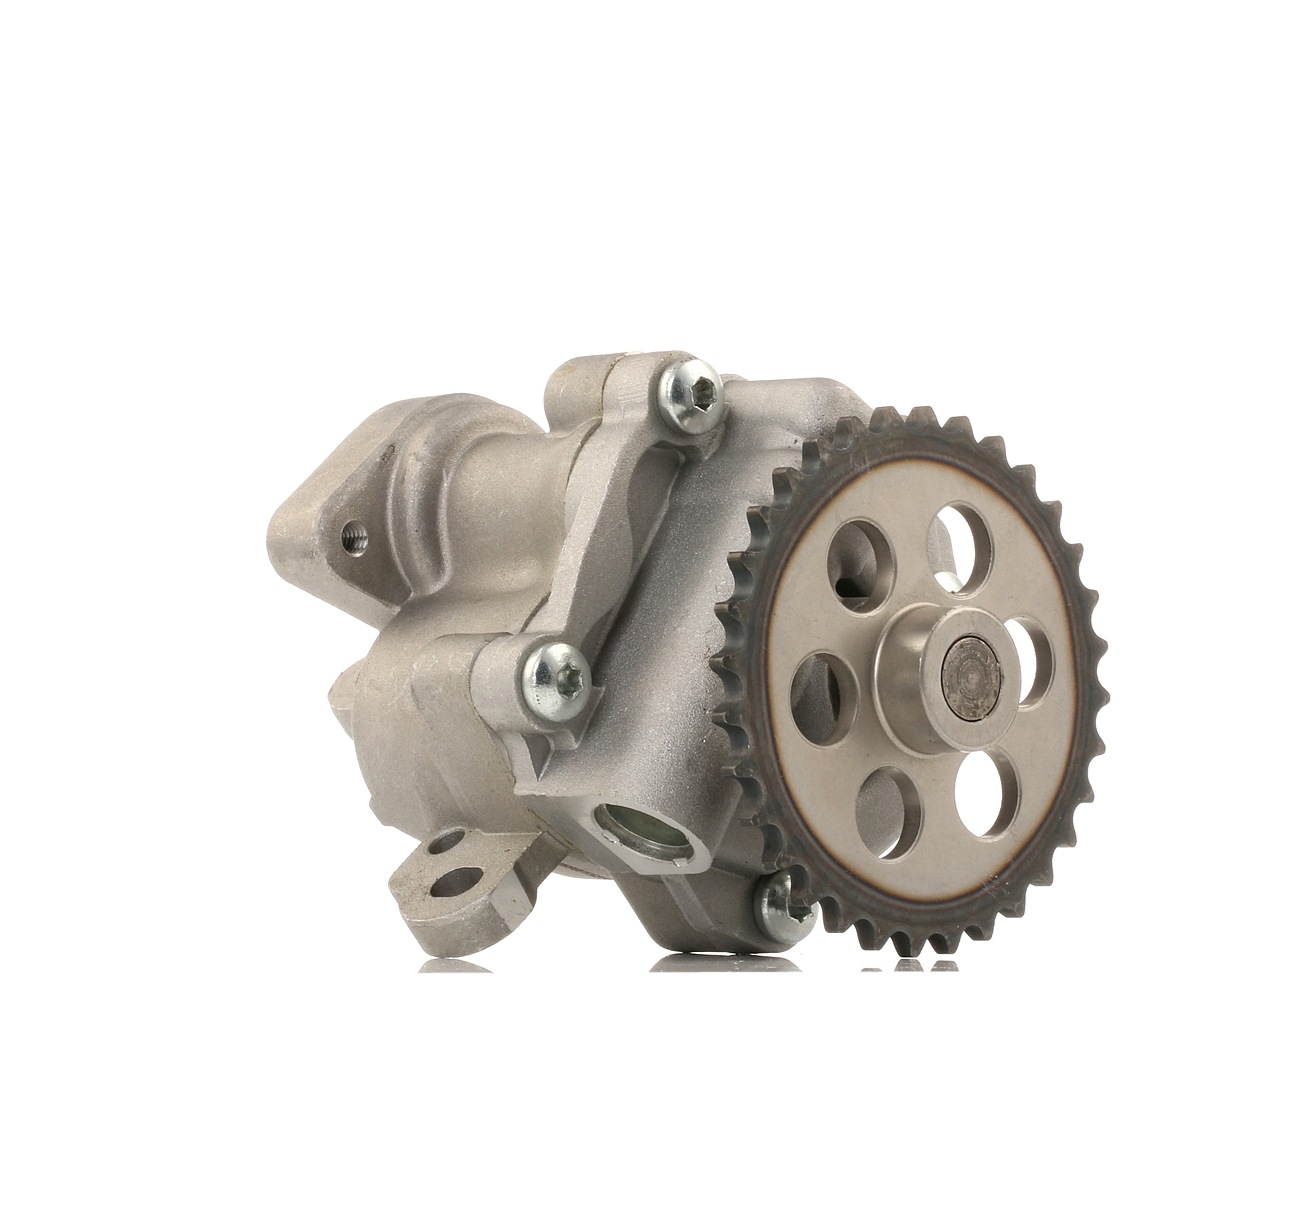 STARK SKOPM-1700042 Oil Pump without gasket/seal, with gear